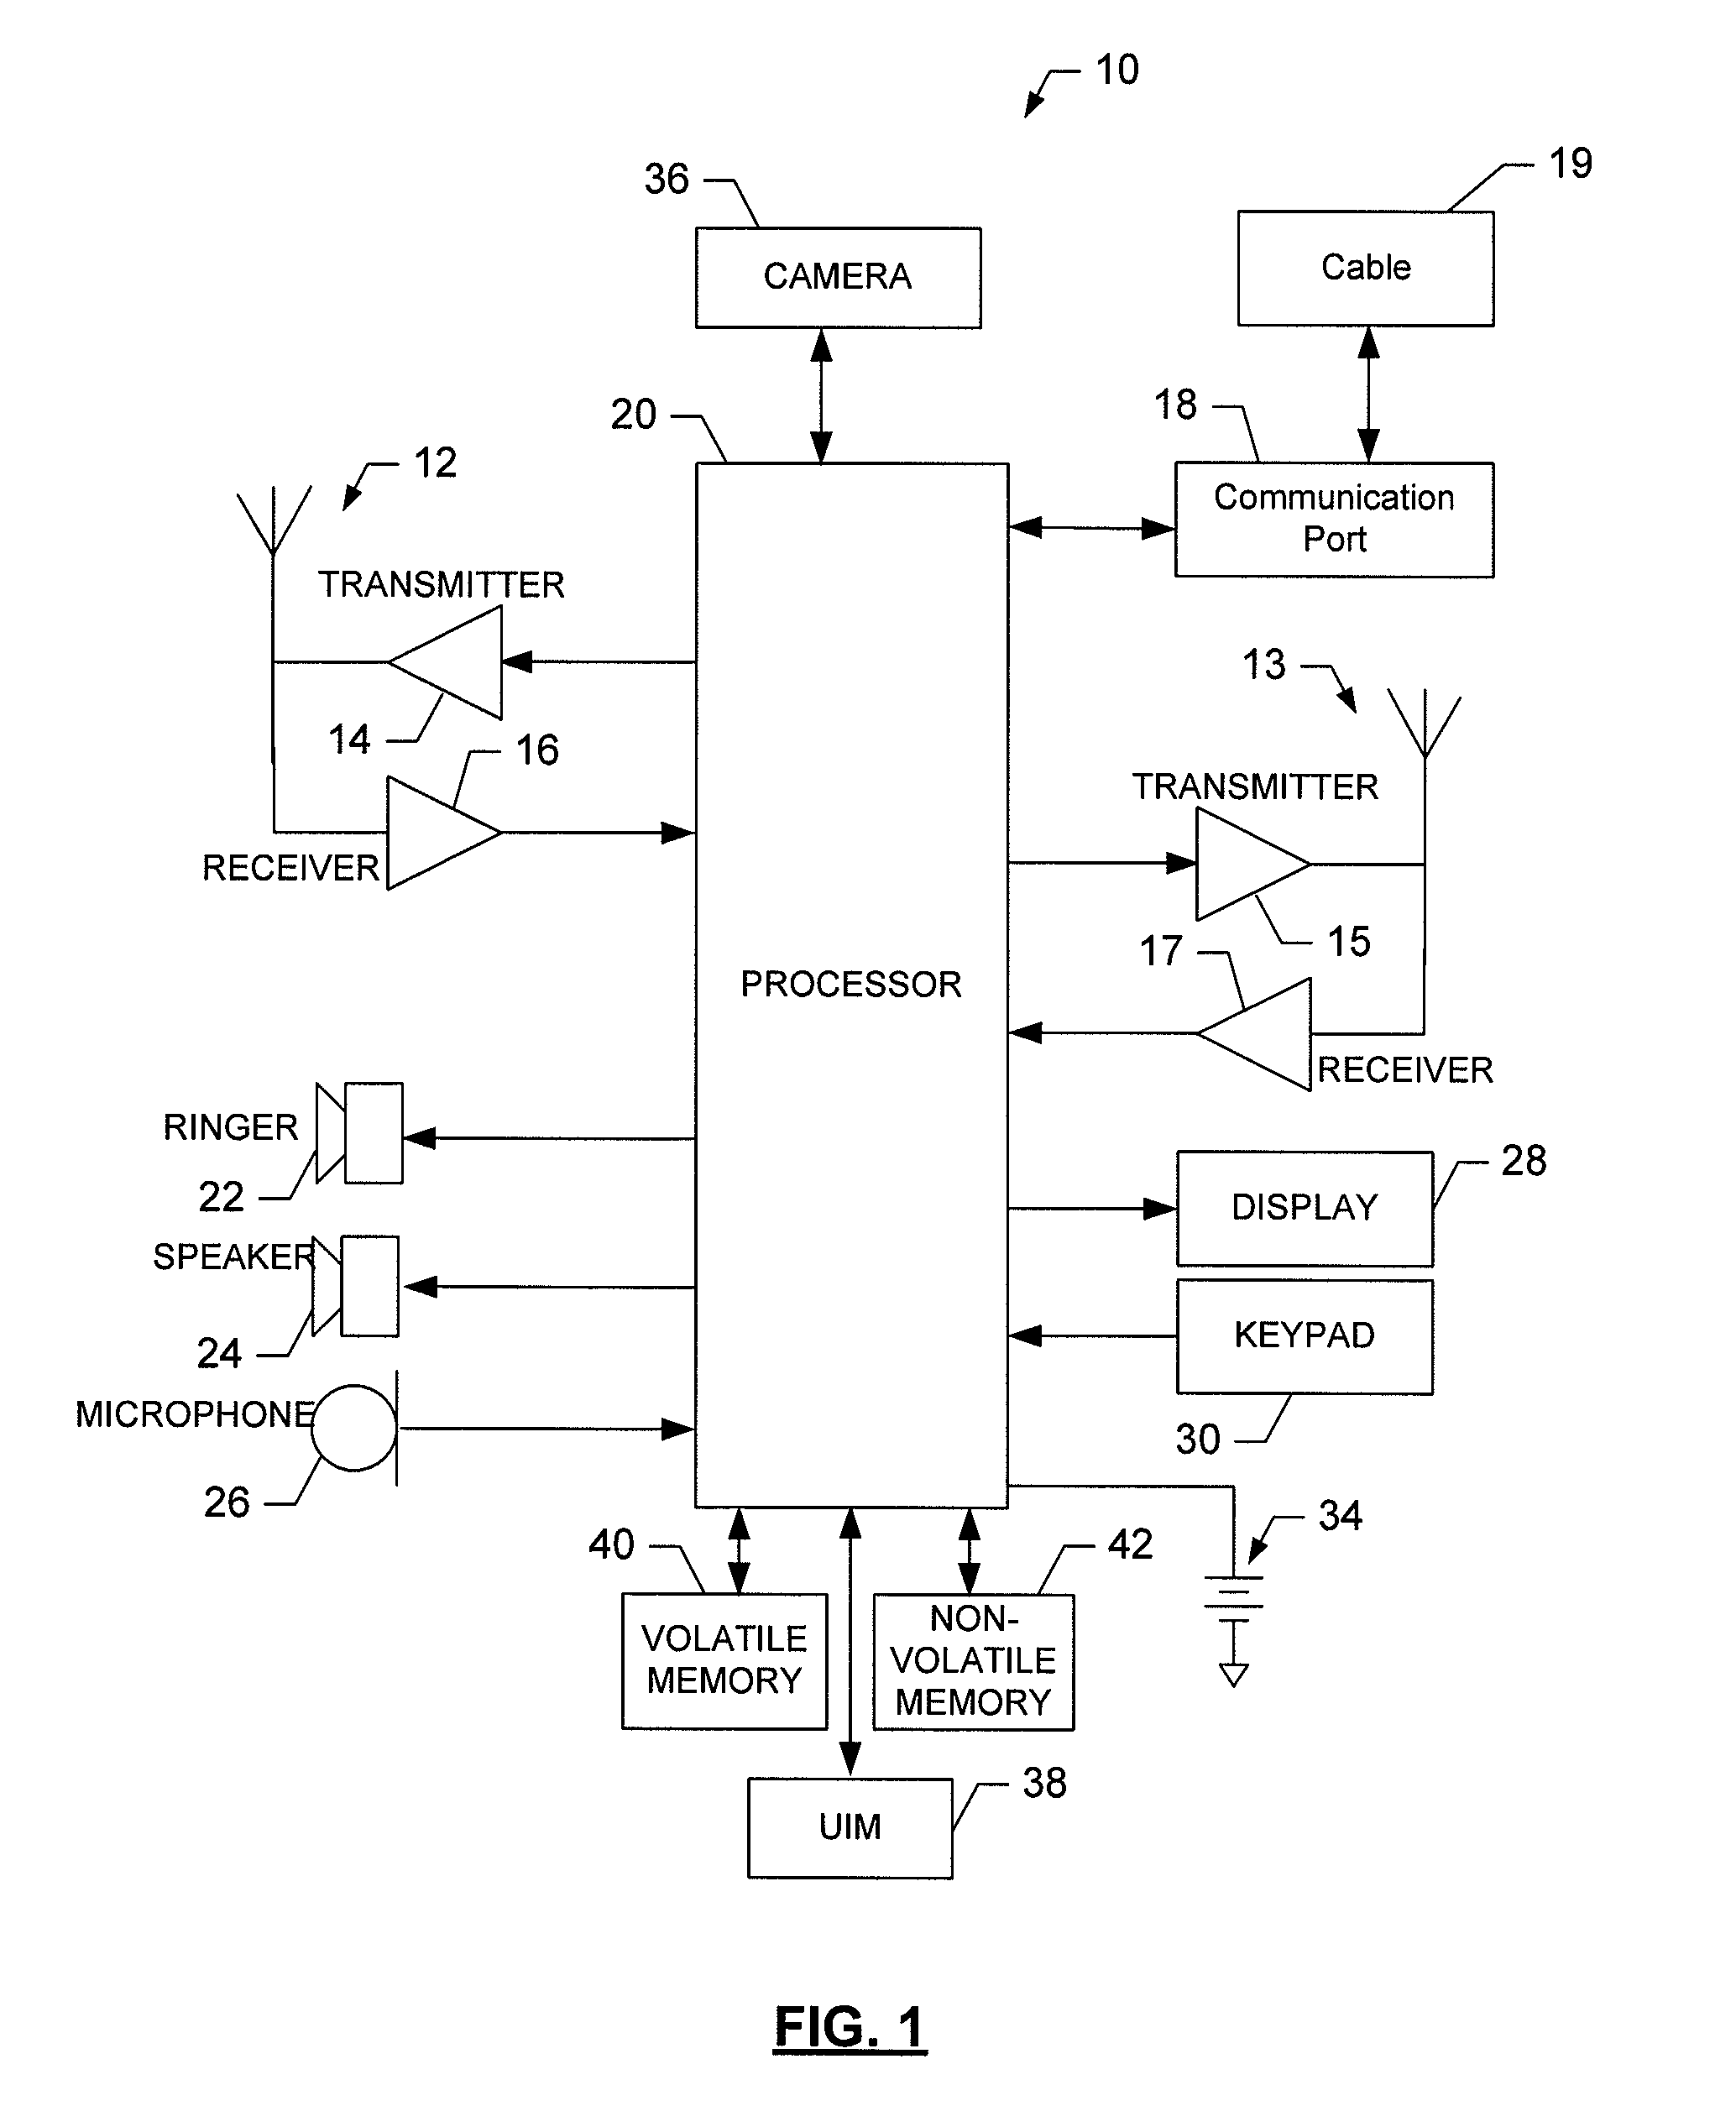 Systems, methods, devices, and computer program products providing data replication for mobile terminals